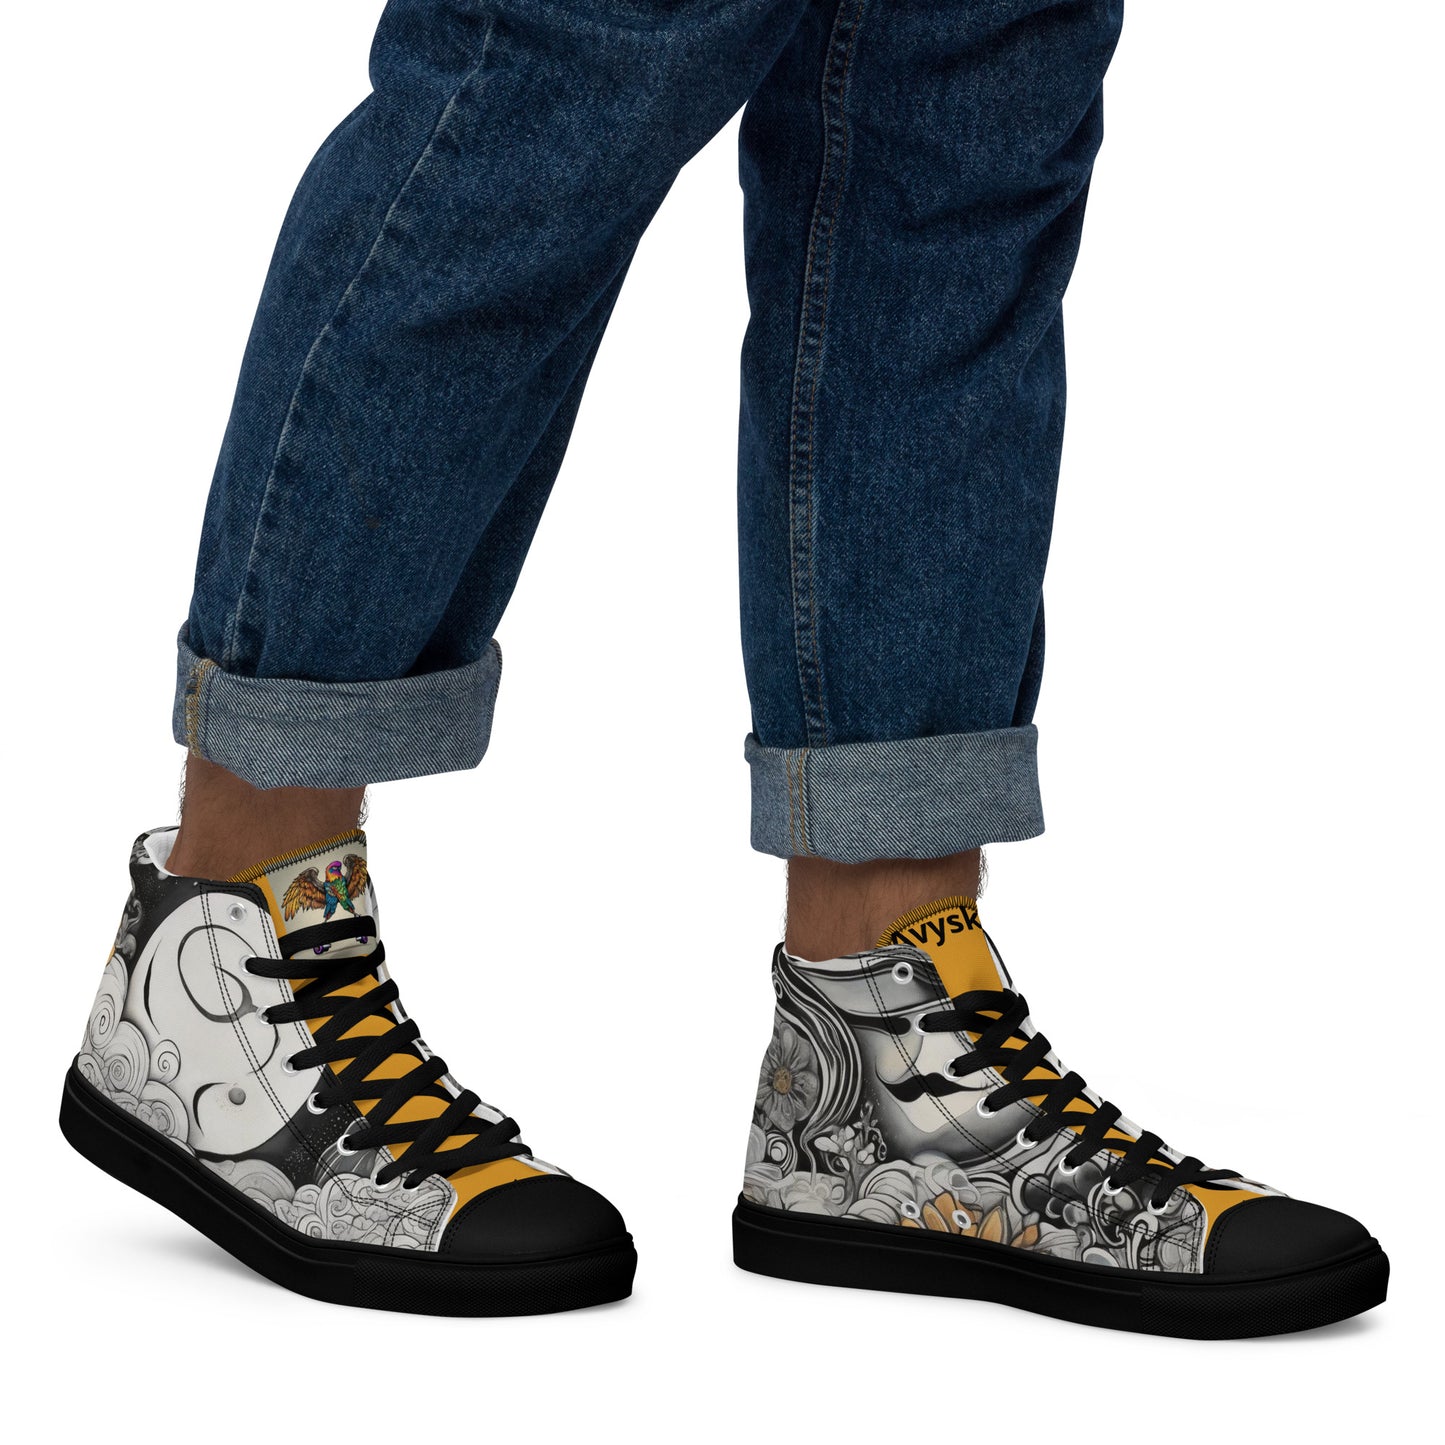 FREE SHIPPING- Men’s high top canvas shoes